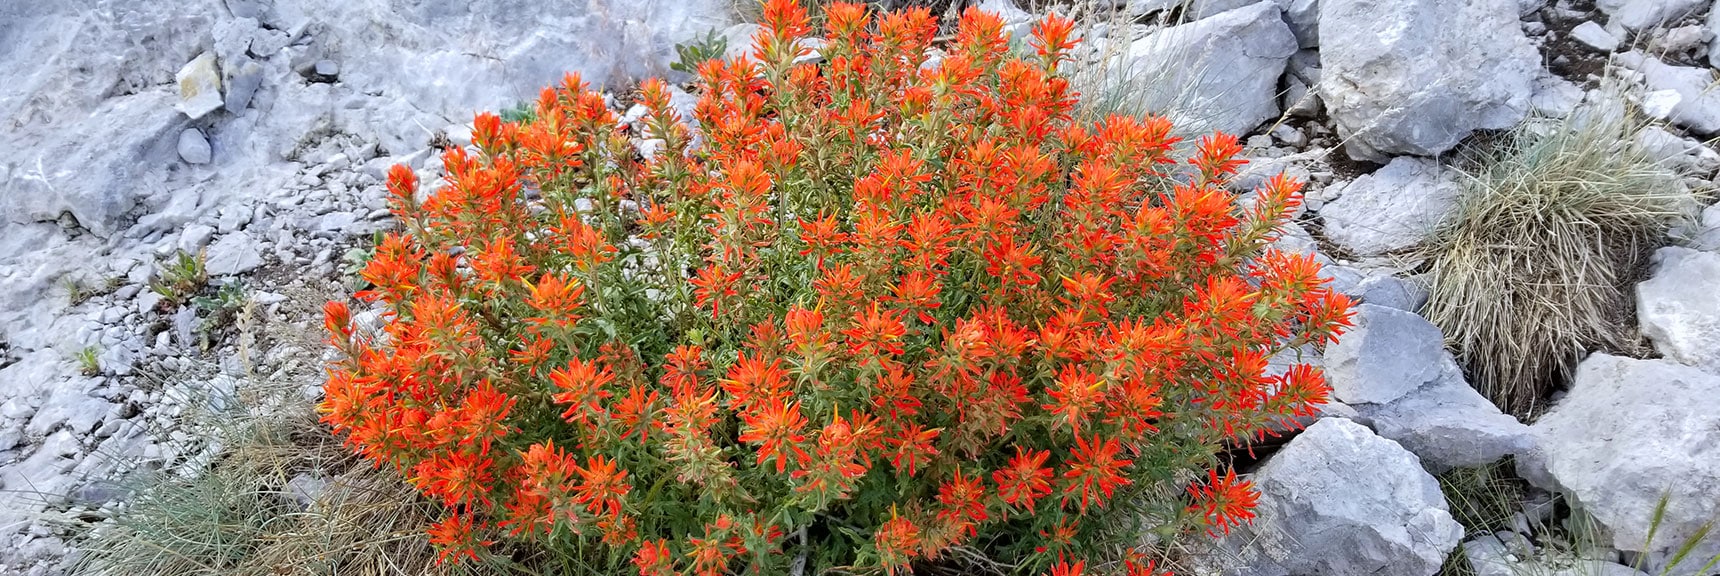 Indian Paintbrush Plant on the Cliff Bypass Trail at the Griffith/Harris Saddle | Six Peak Circuit Adventure in the Spring Mountains, Nevada